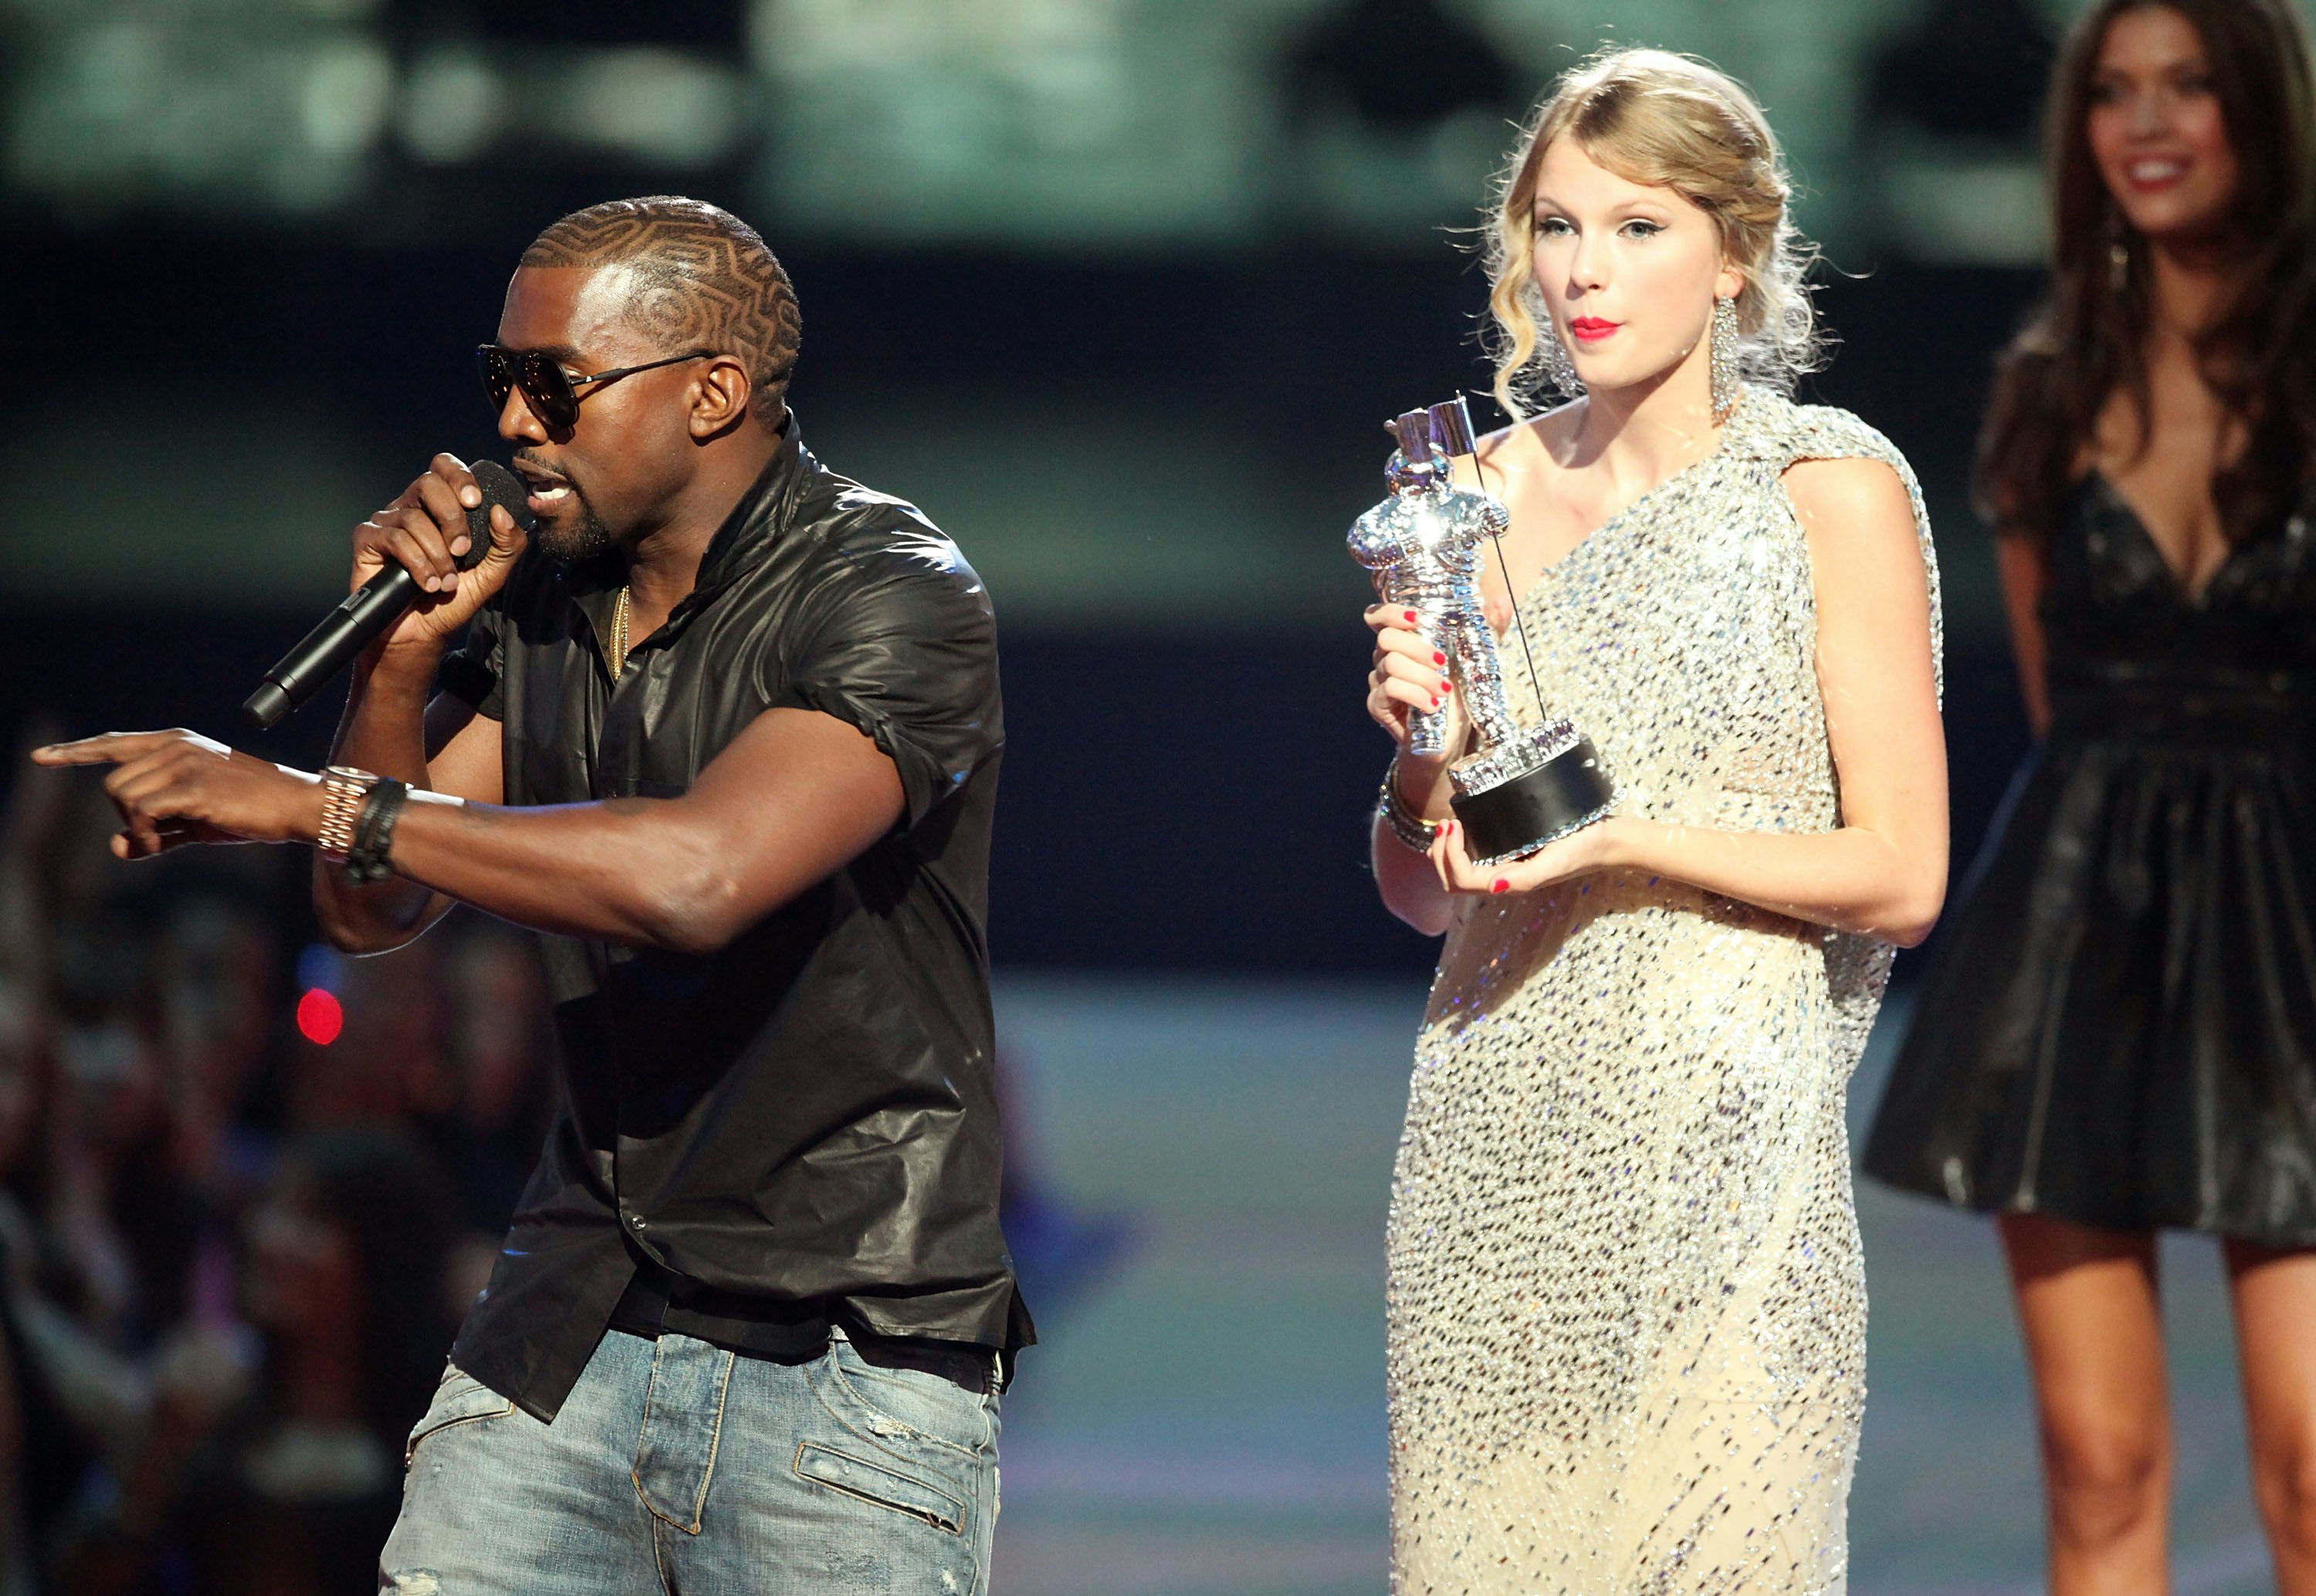 A Timeline Of Kanye West Taylor Swifts Feud To Help You